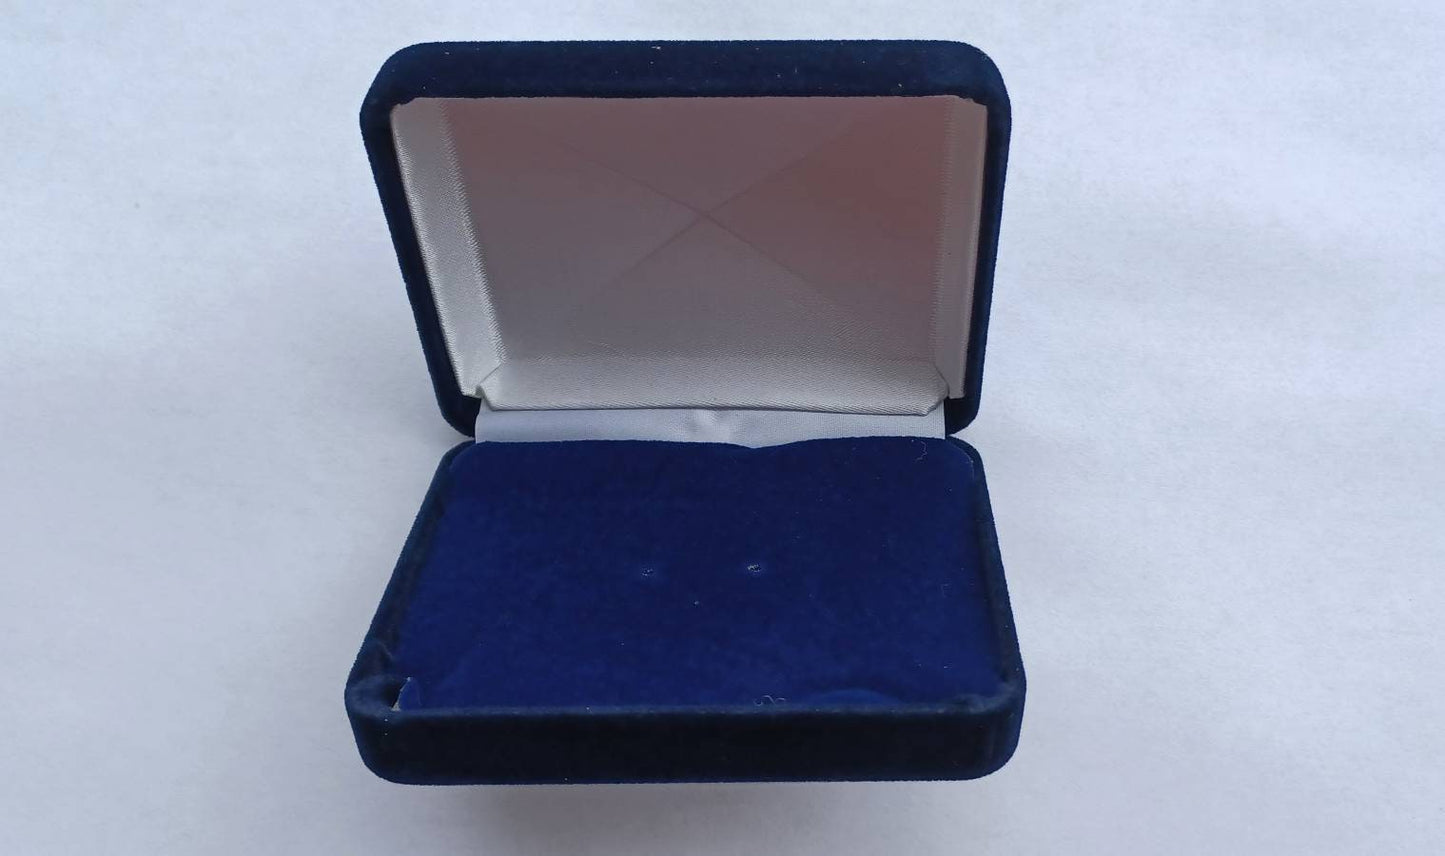 Add a gift box to your order!  Blue velveteen jewelry gift box 2.50 x 3.25.  Available with any purchase.